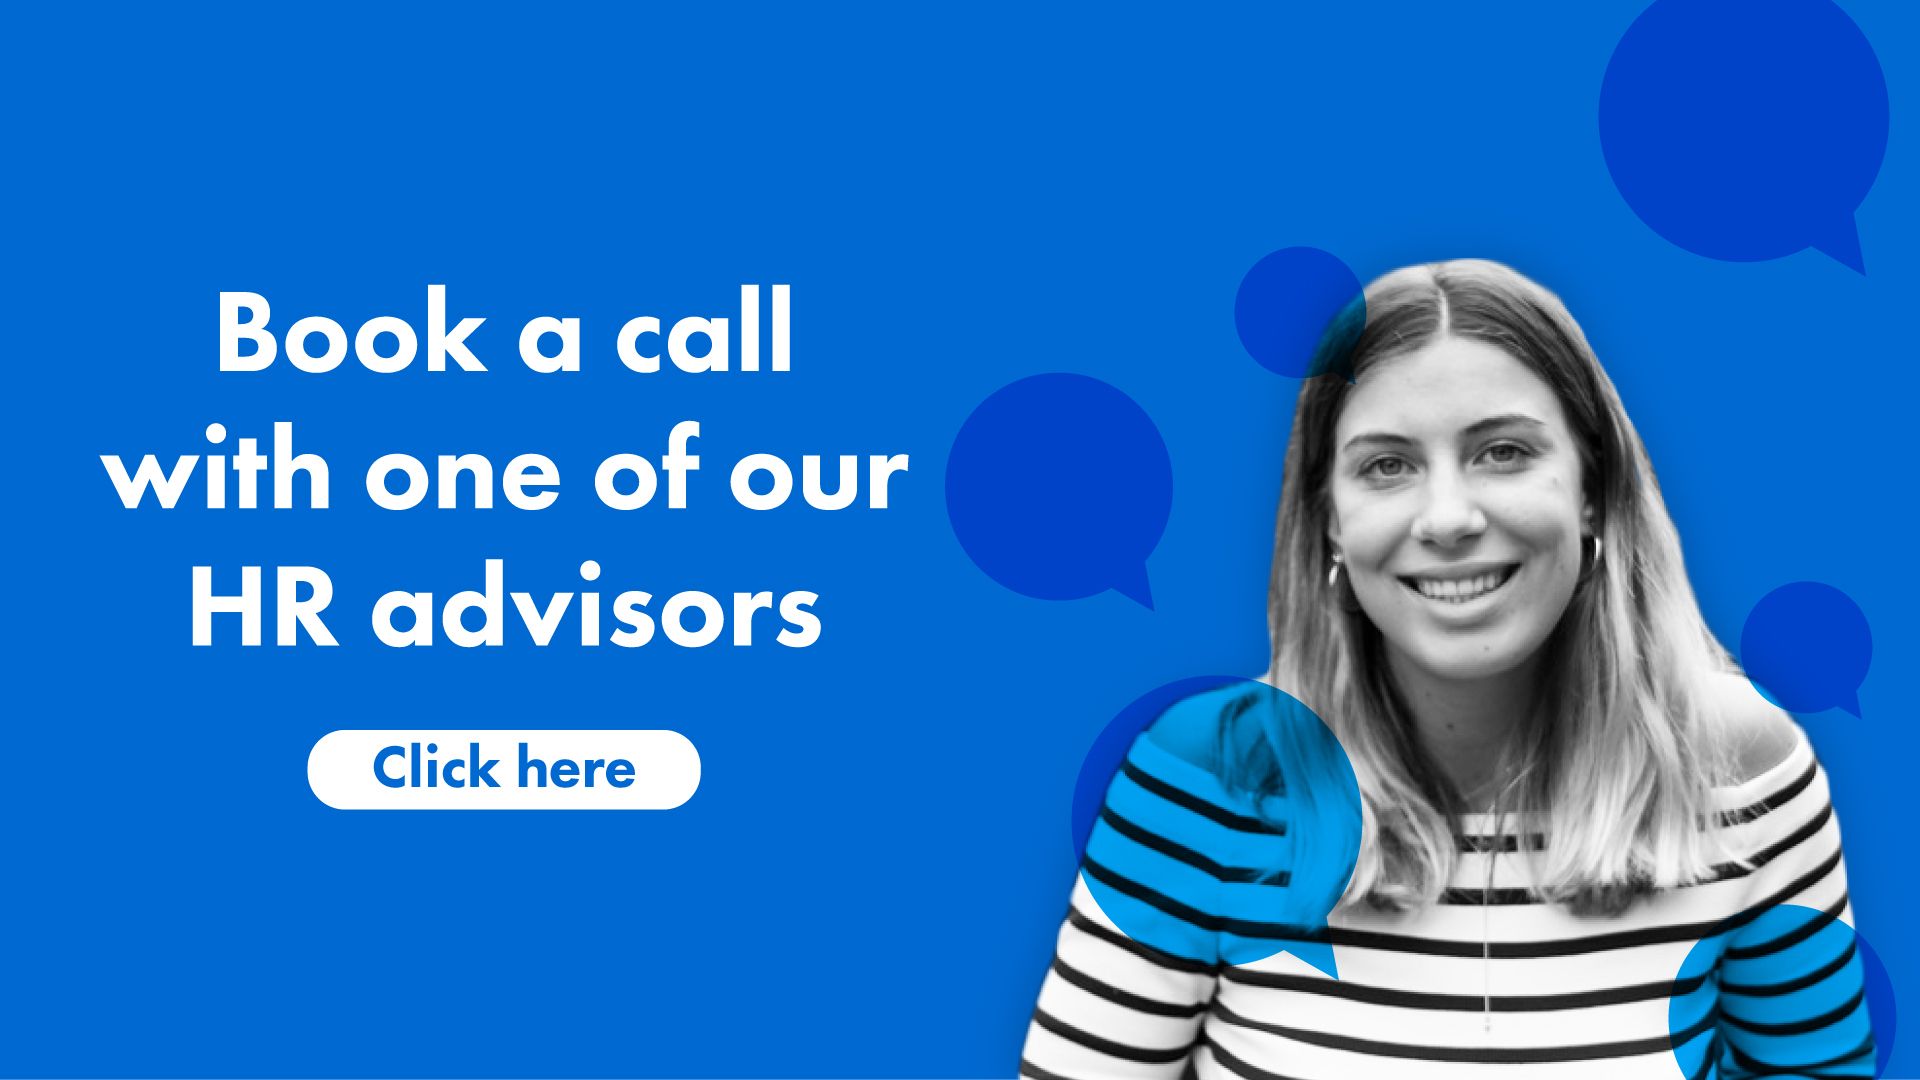 Click here to book a call with one of our advisors